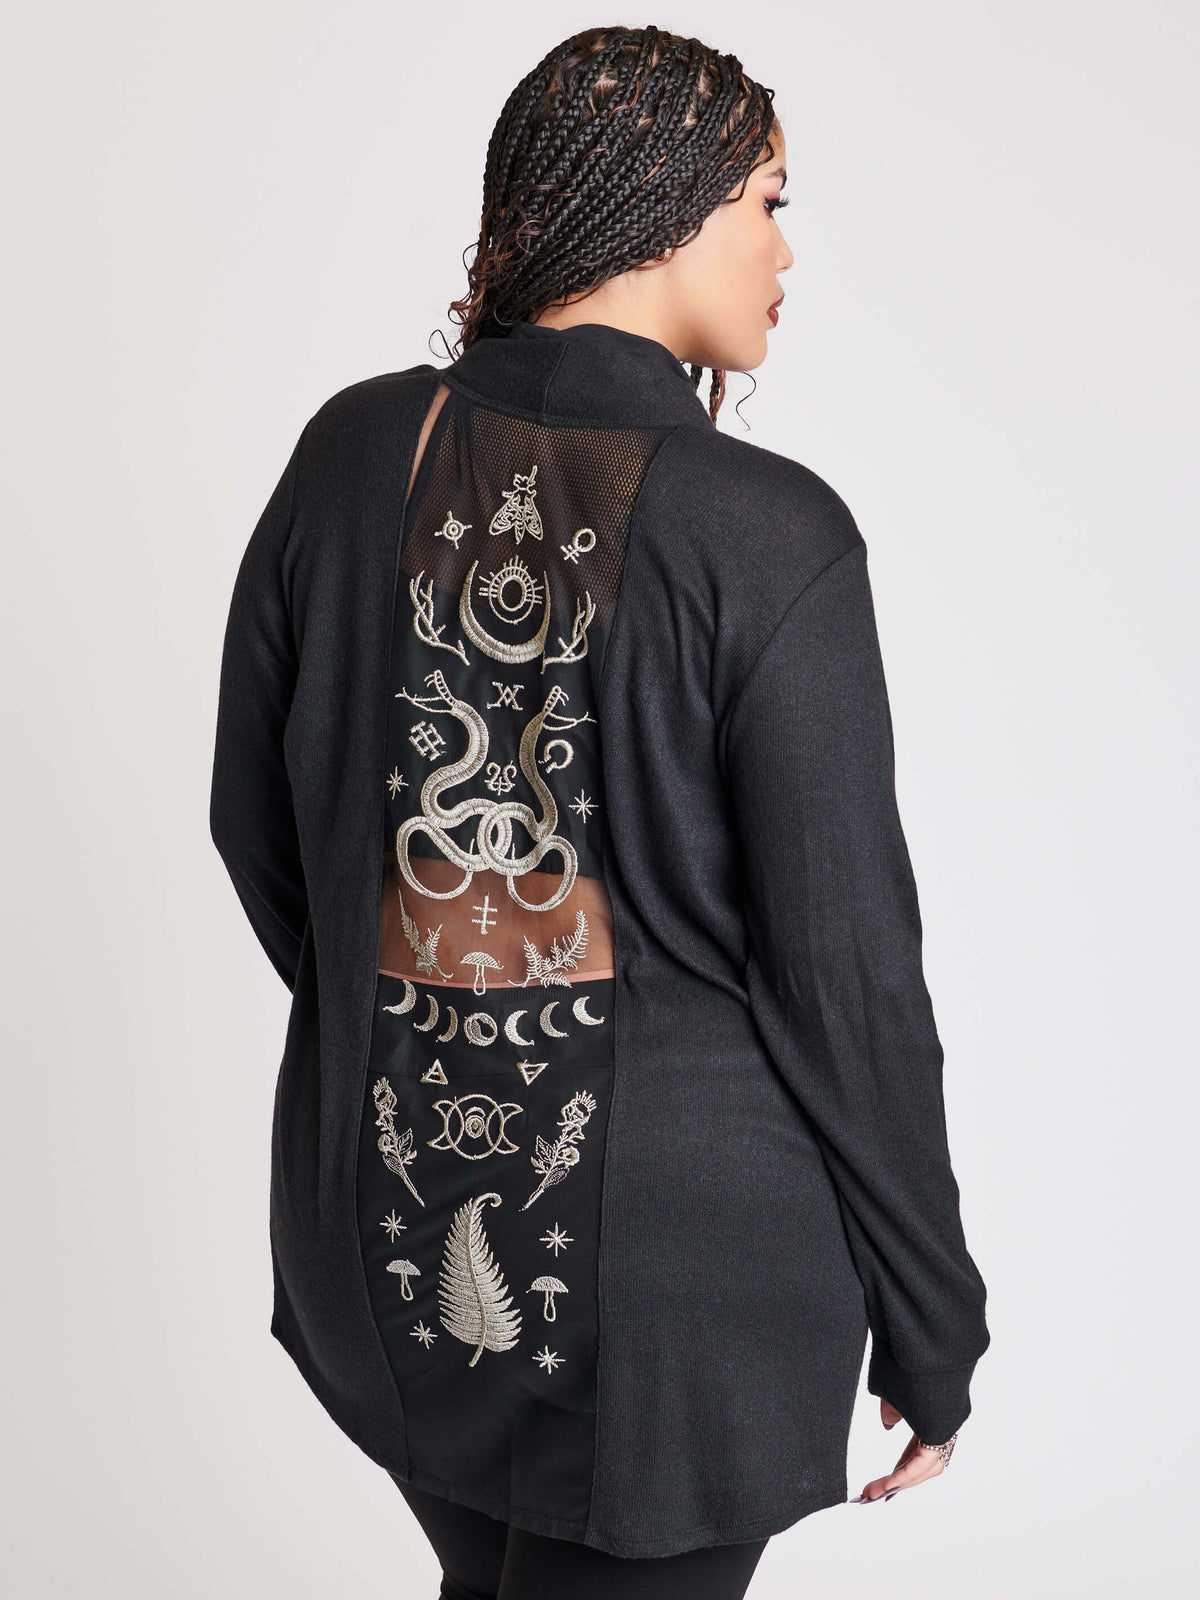 Embroidered Relics Cardigan